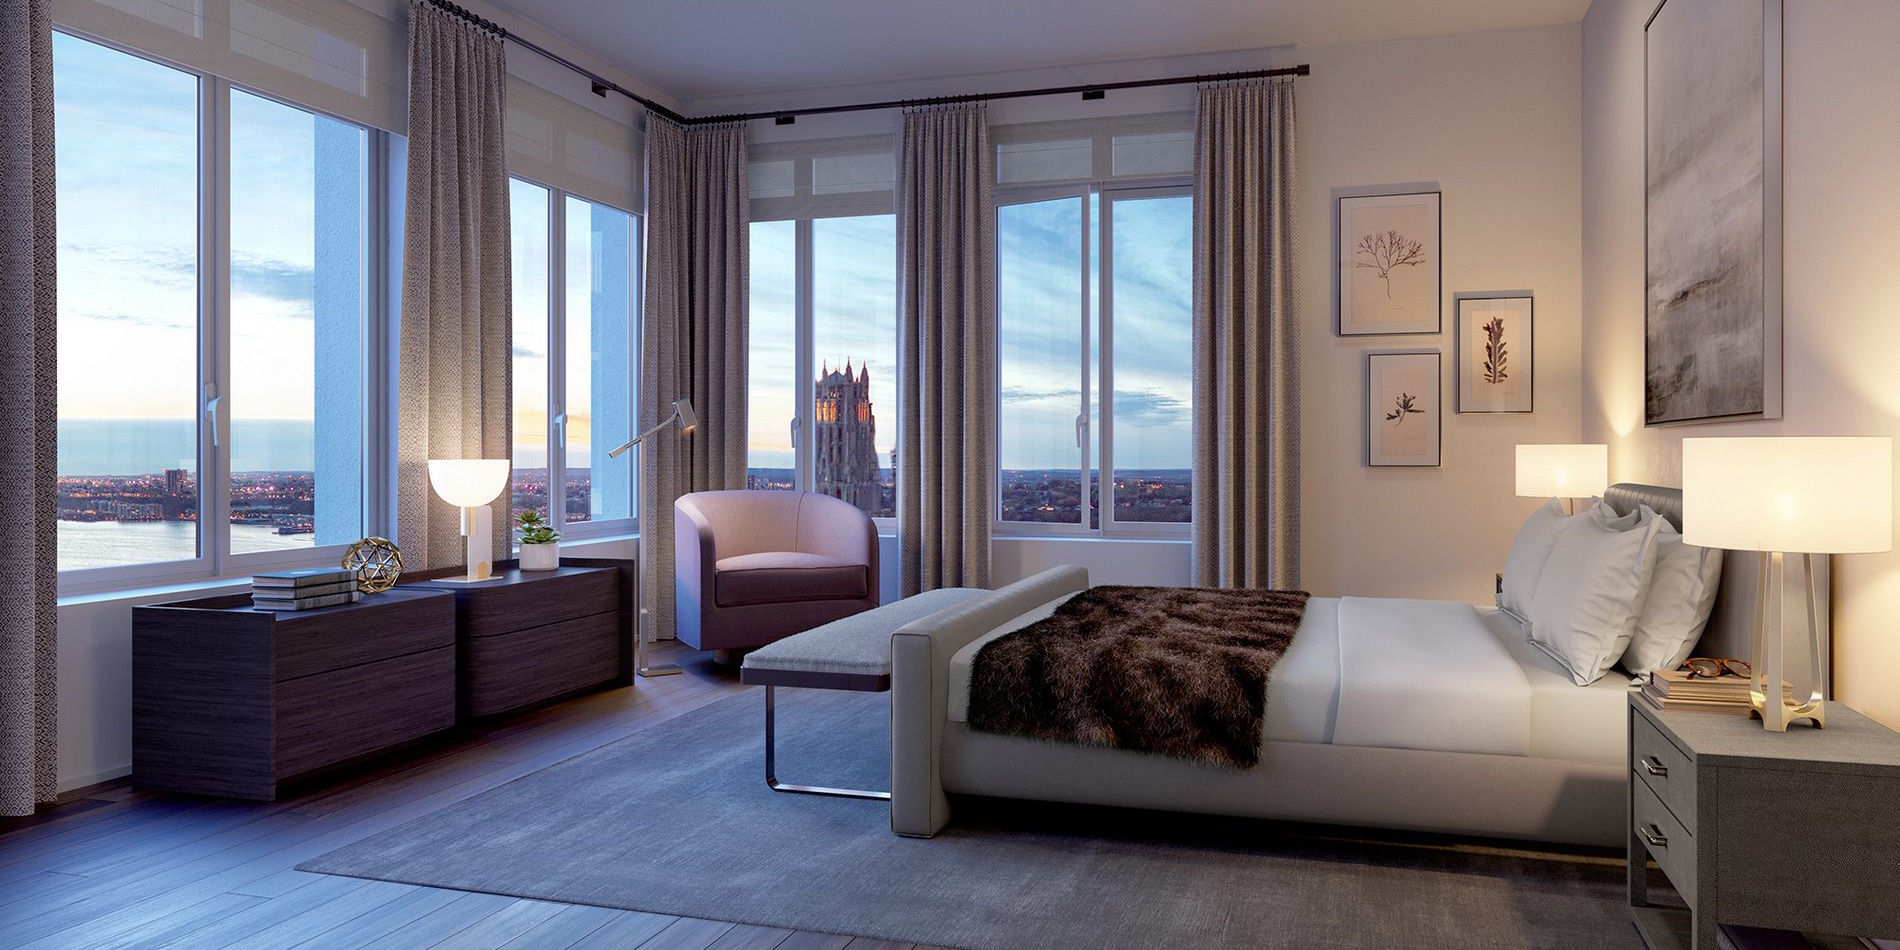 Bedroom at The Vandewater luxury condos in NYC. Corner room with bedroom furniture, floor-to-ceiling windows, and city views.